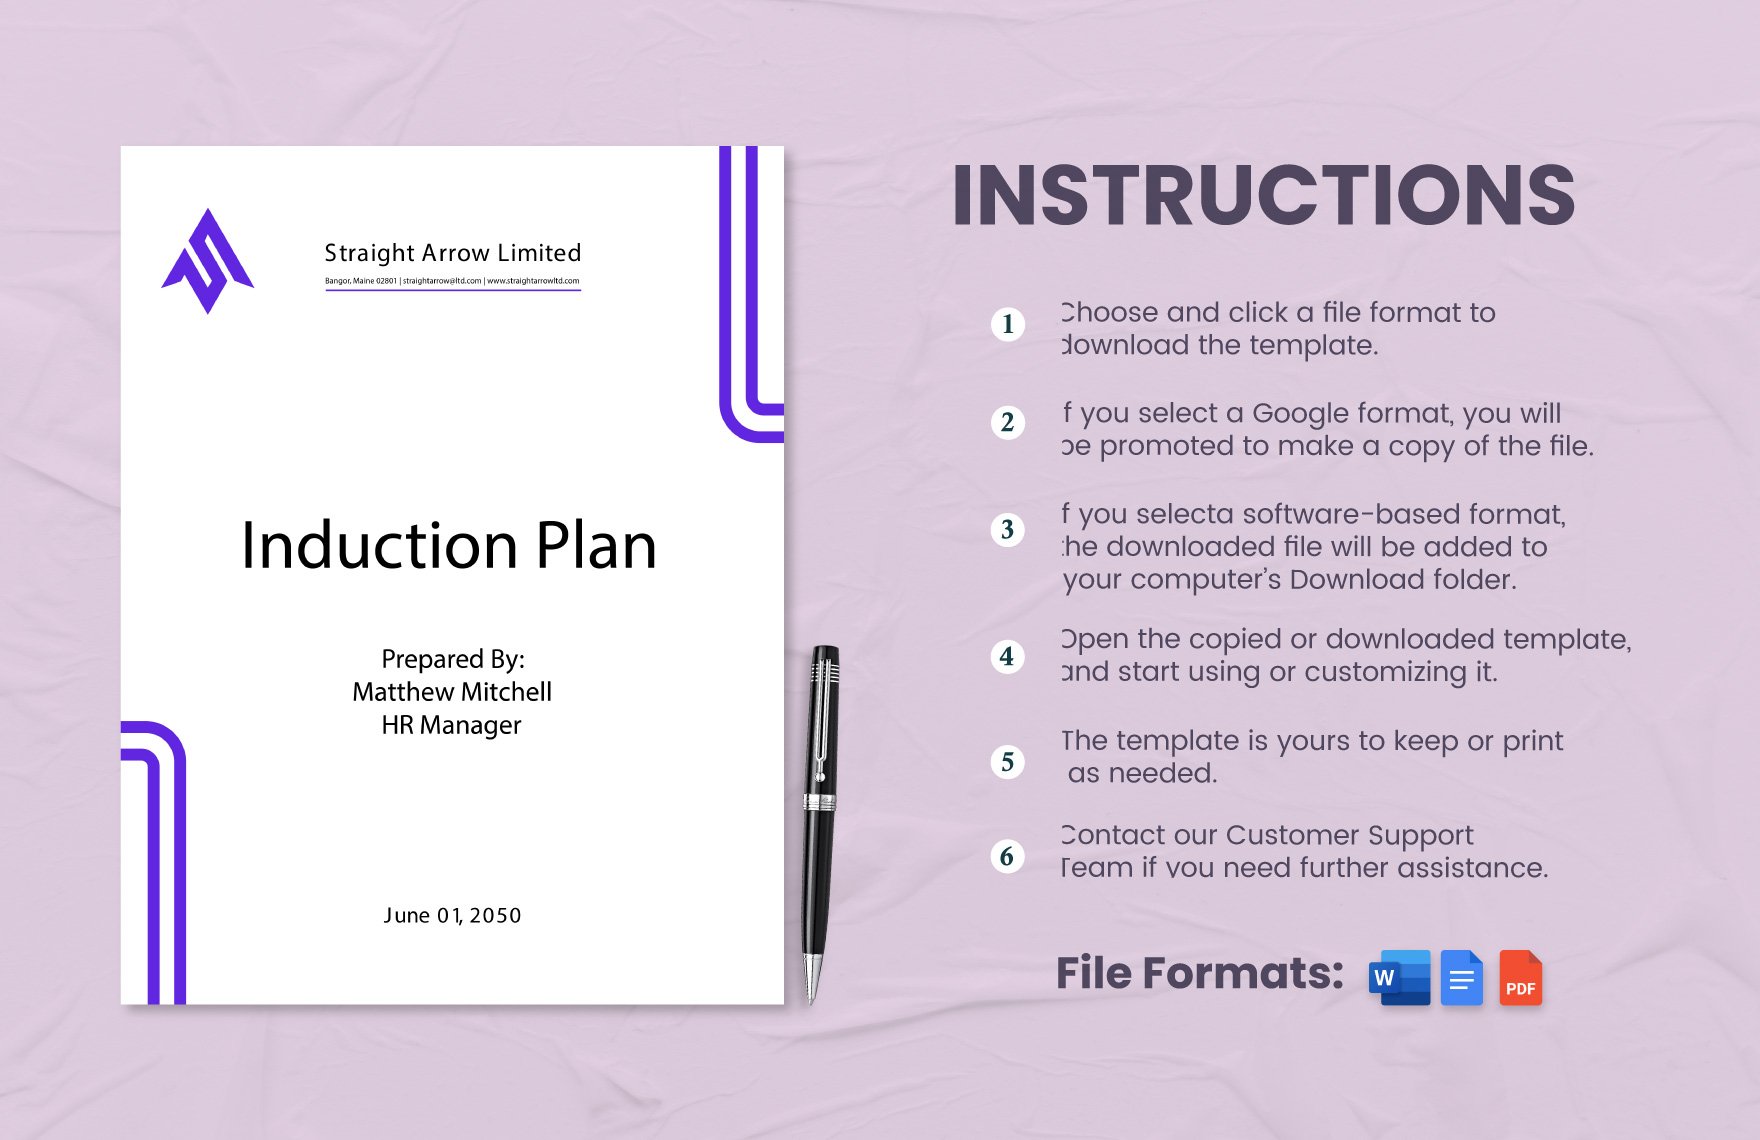 Sample Induction Plan Template